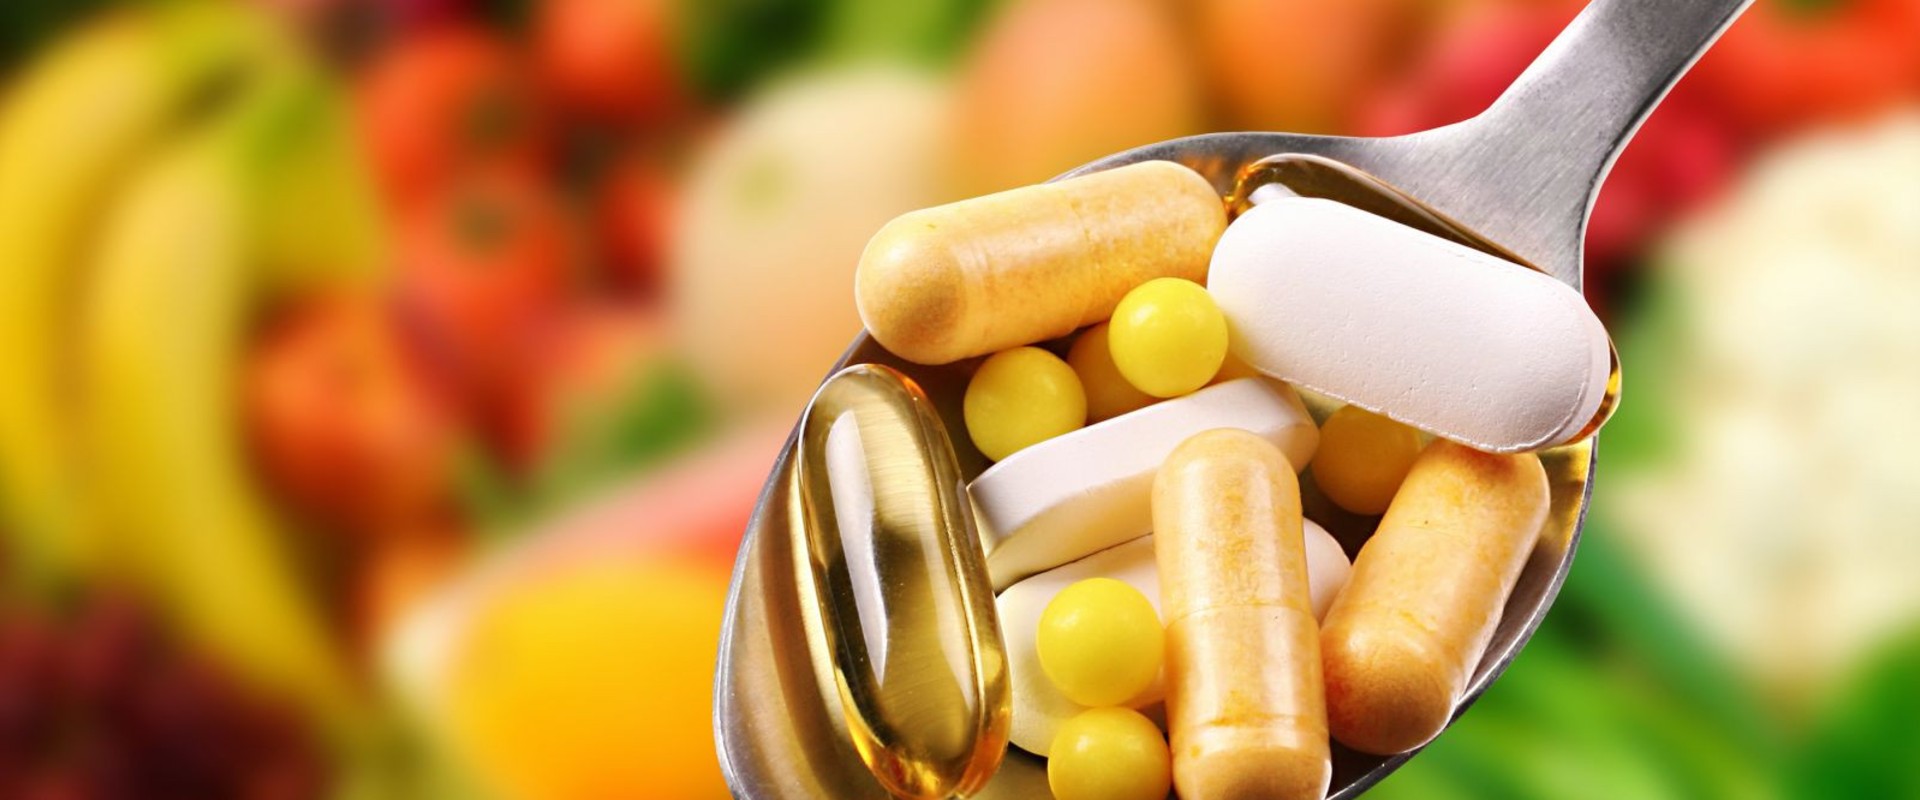 What are the concerns about dietary supplements?